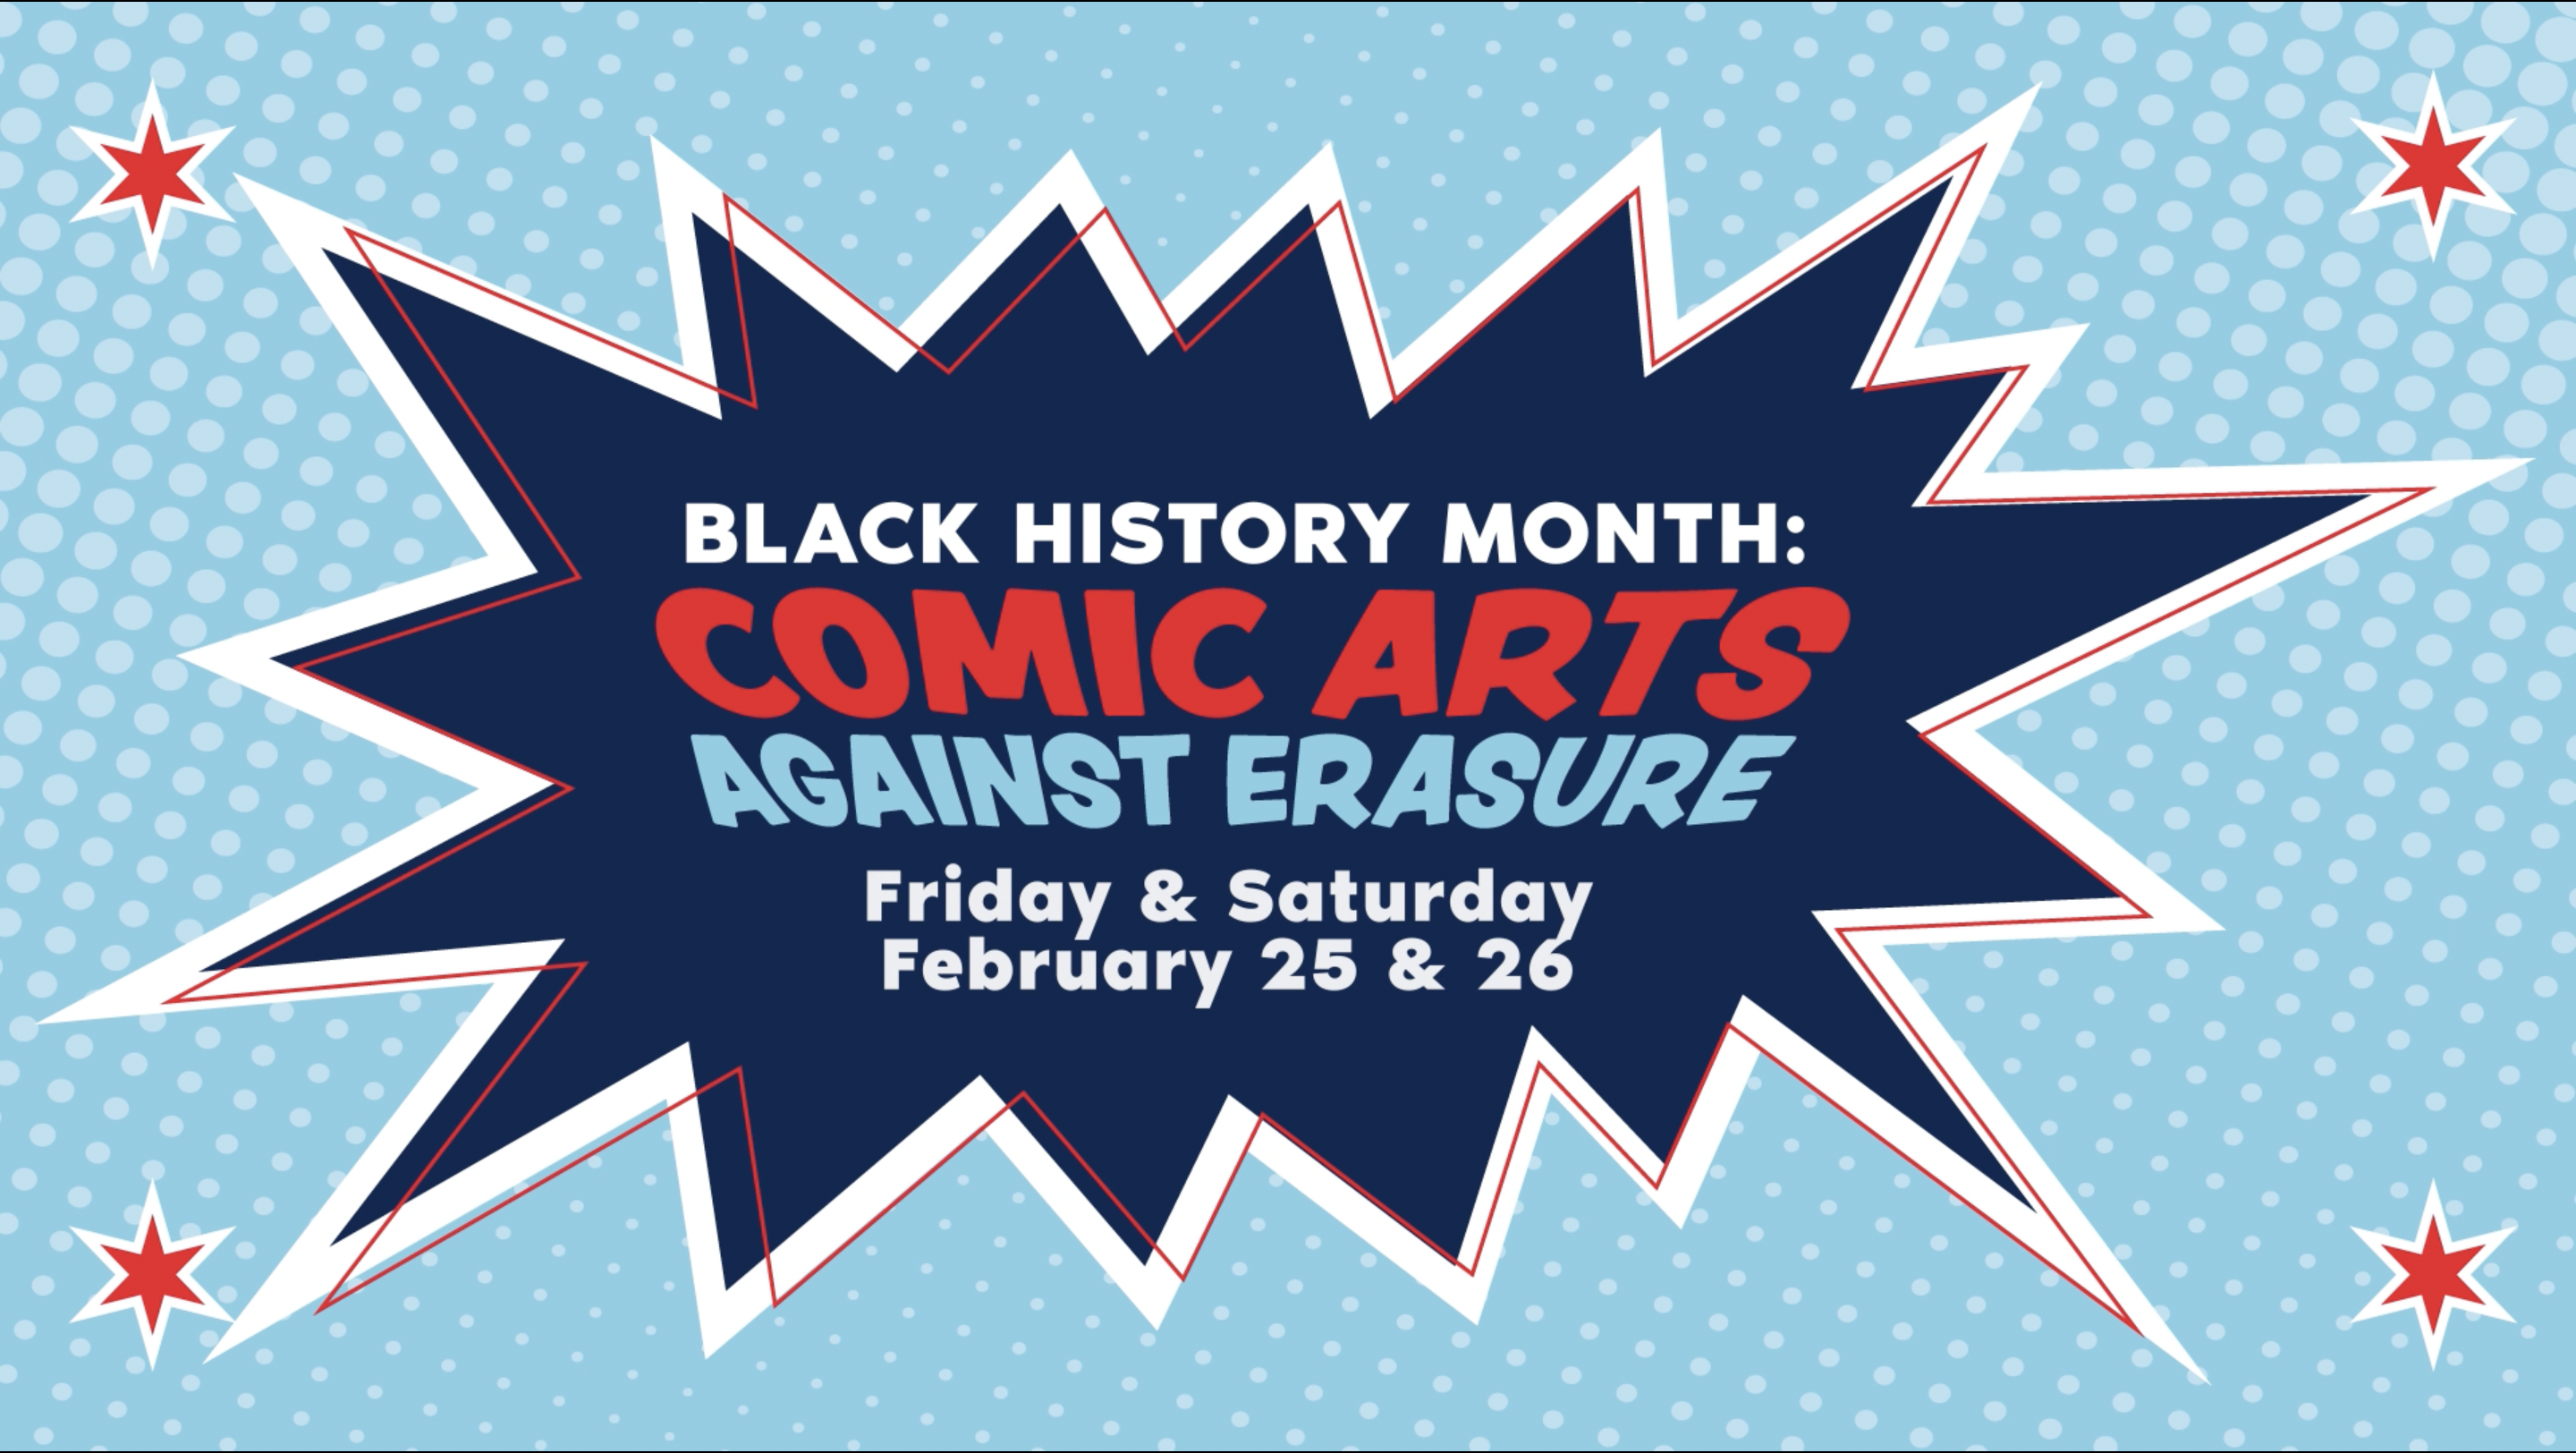 BCAF and Chicago History Museum Launch Black History Month Program